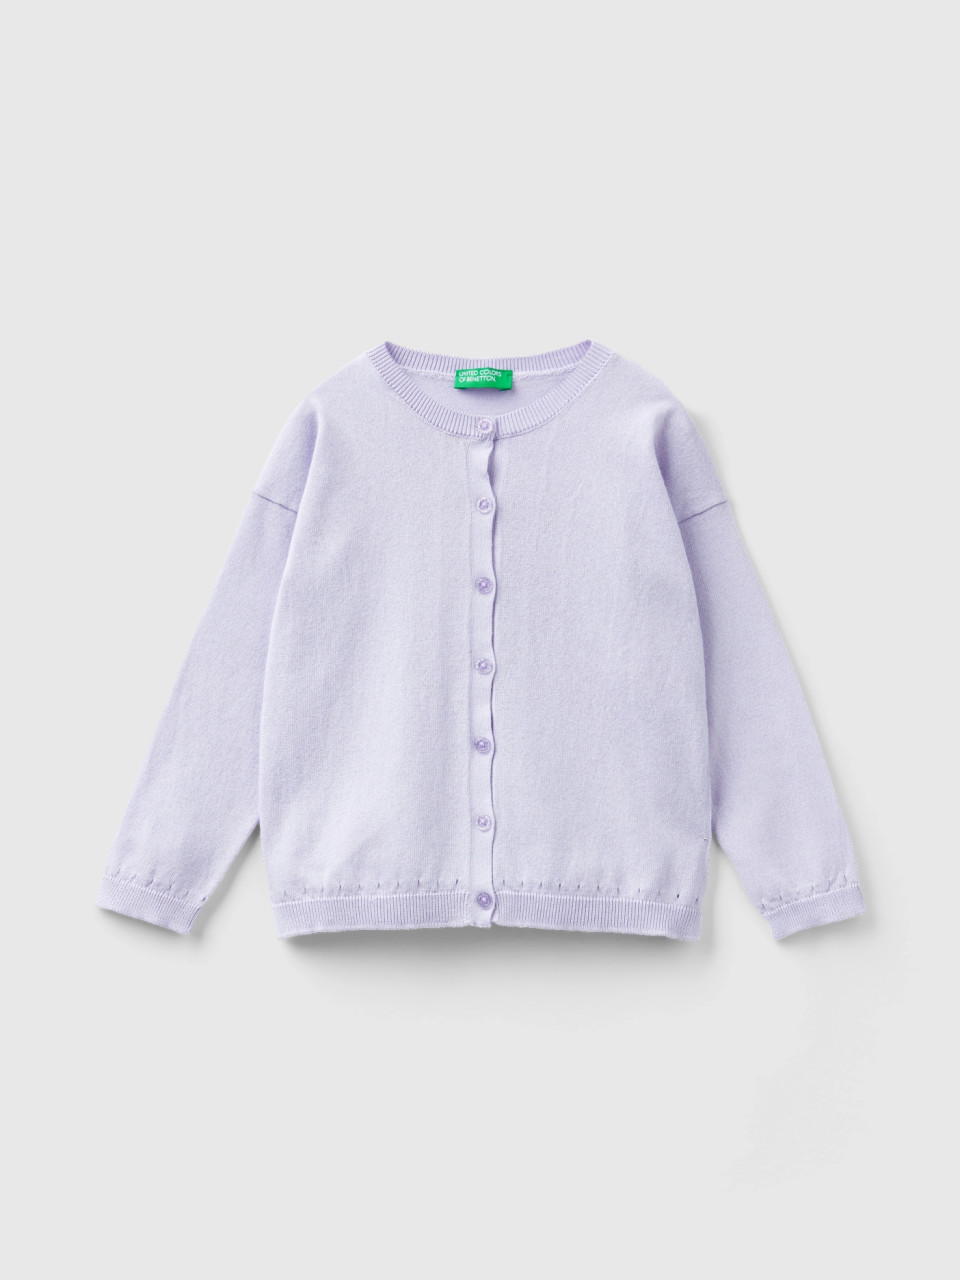 Benetton, Cardigan With Glittery Buttons, Lilac, Kids